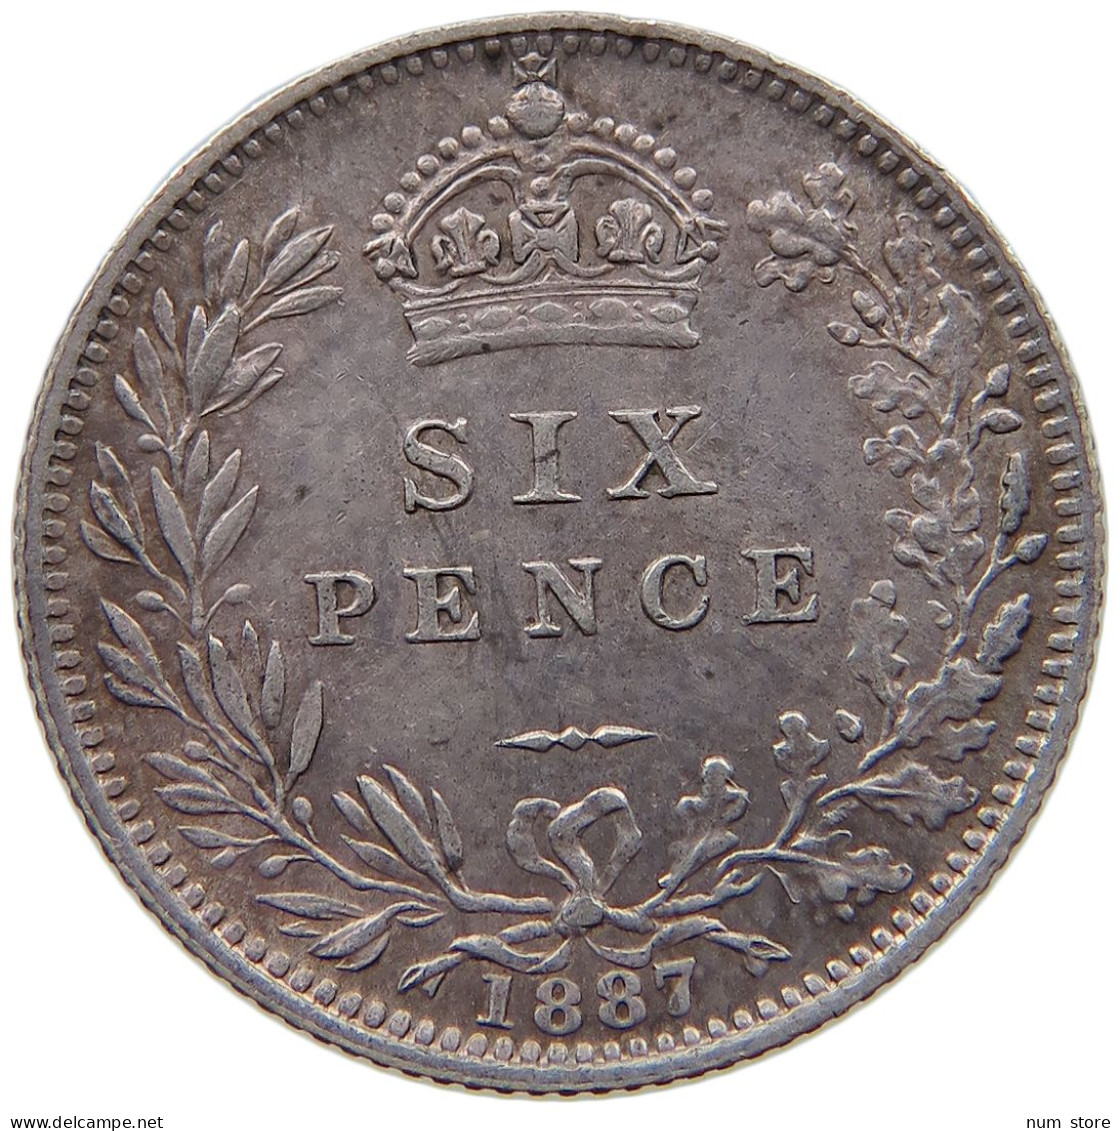 GREAT BRITAIN SIXPENCE 1887 Victoria 1837-1901 #c053 0199 - H. 6 Pence